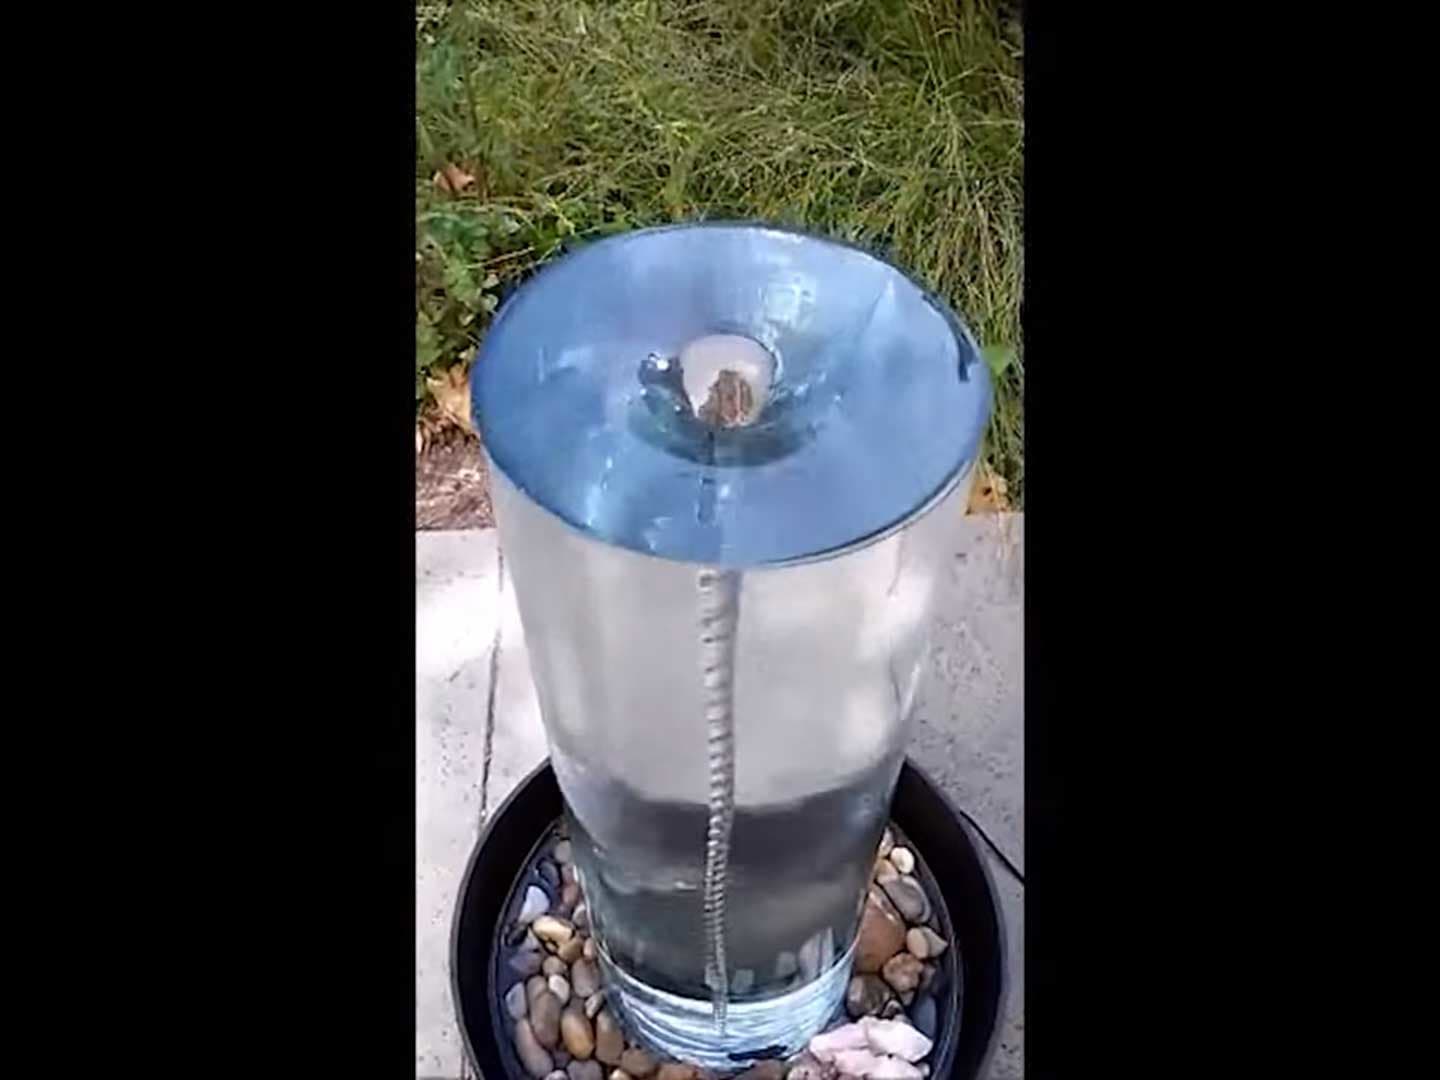 Vortex Water: Features, Benefits & How to Make It at Home